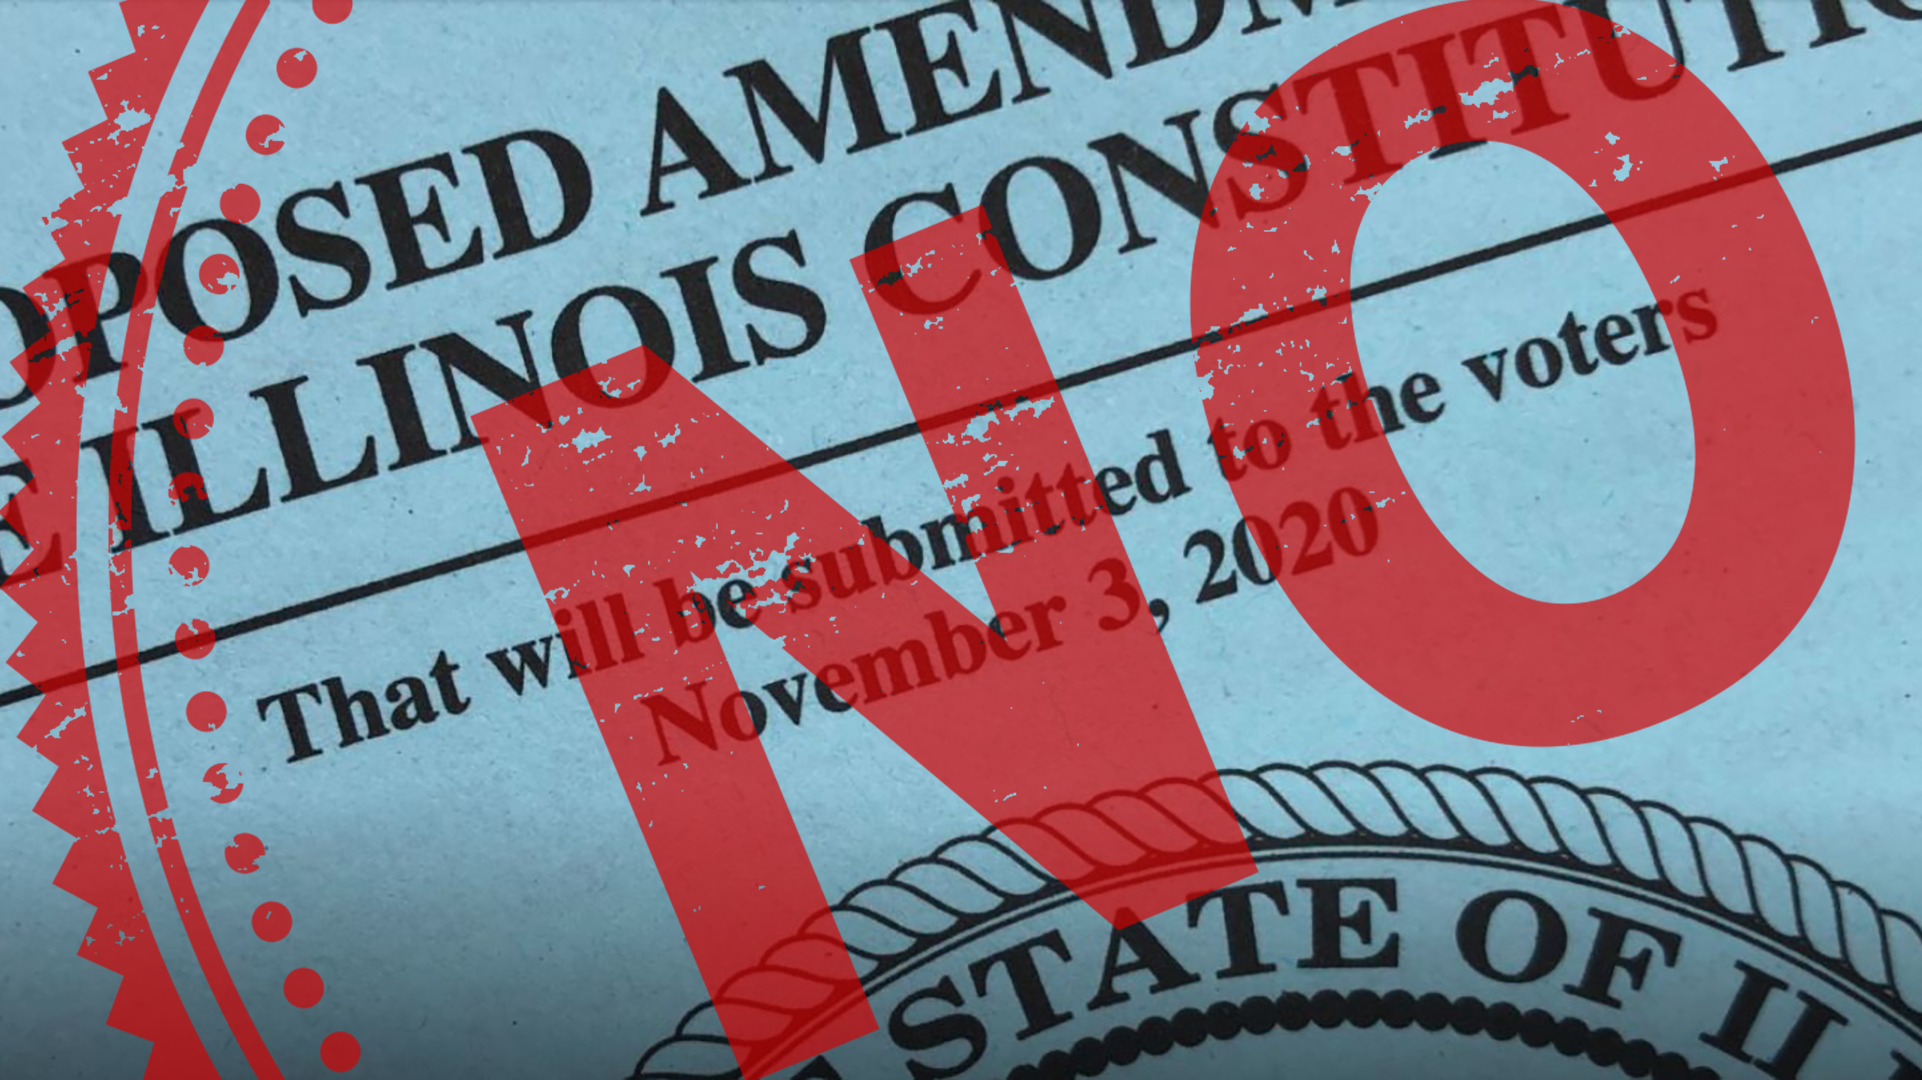 Opinion: For the Love of God, Vote NO on the Illinois "Fair" Tax Amendment